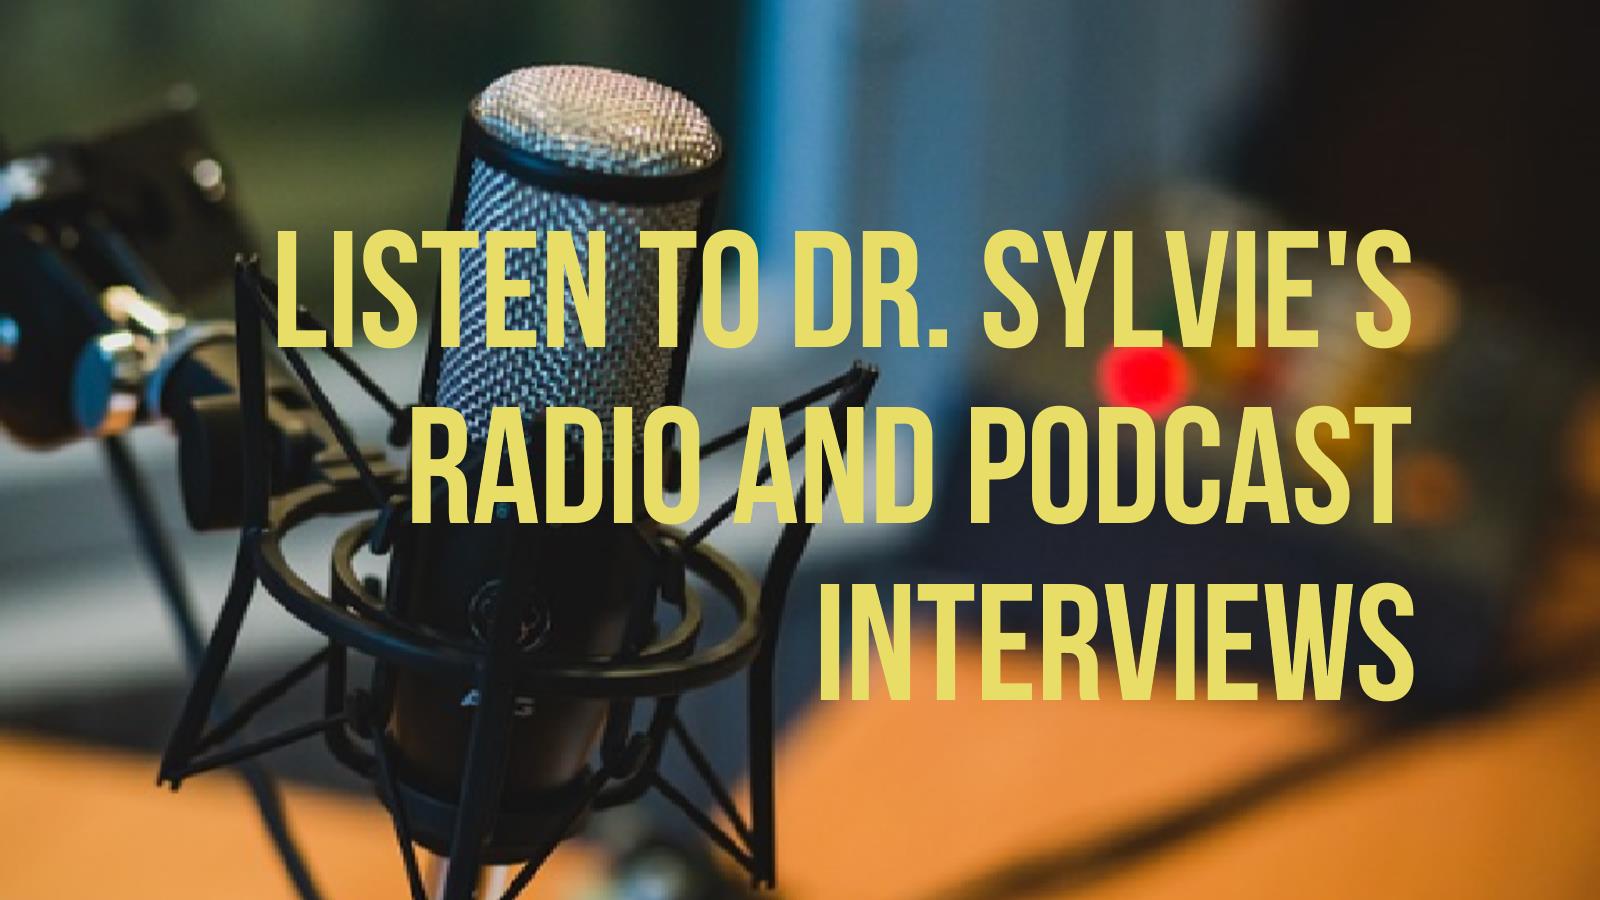 Dr. Sylvies's Podcast Interviews